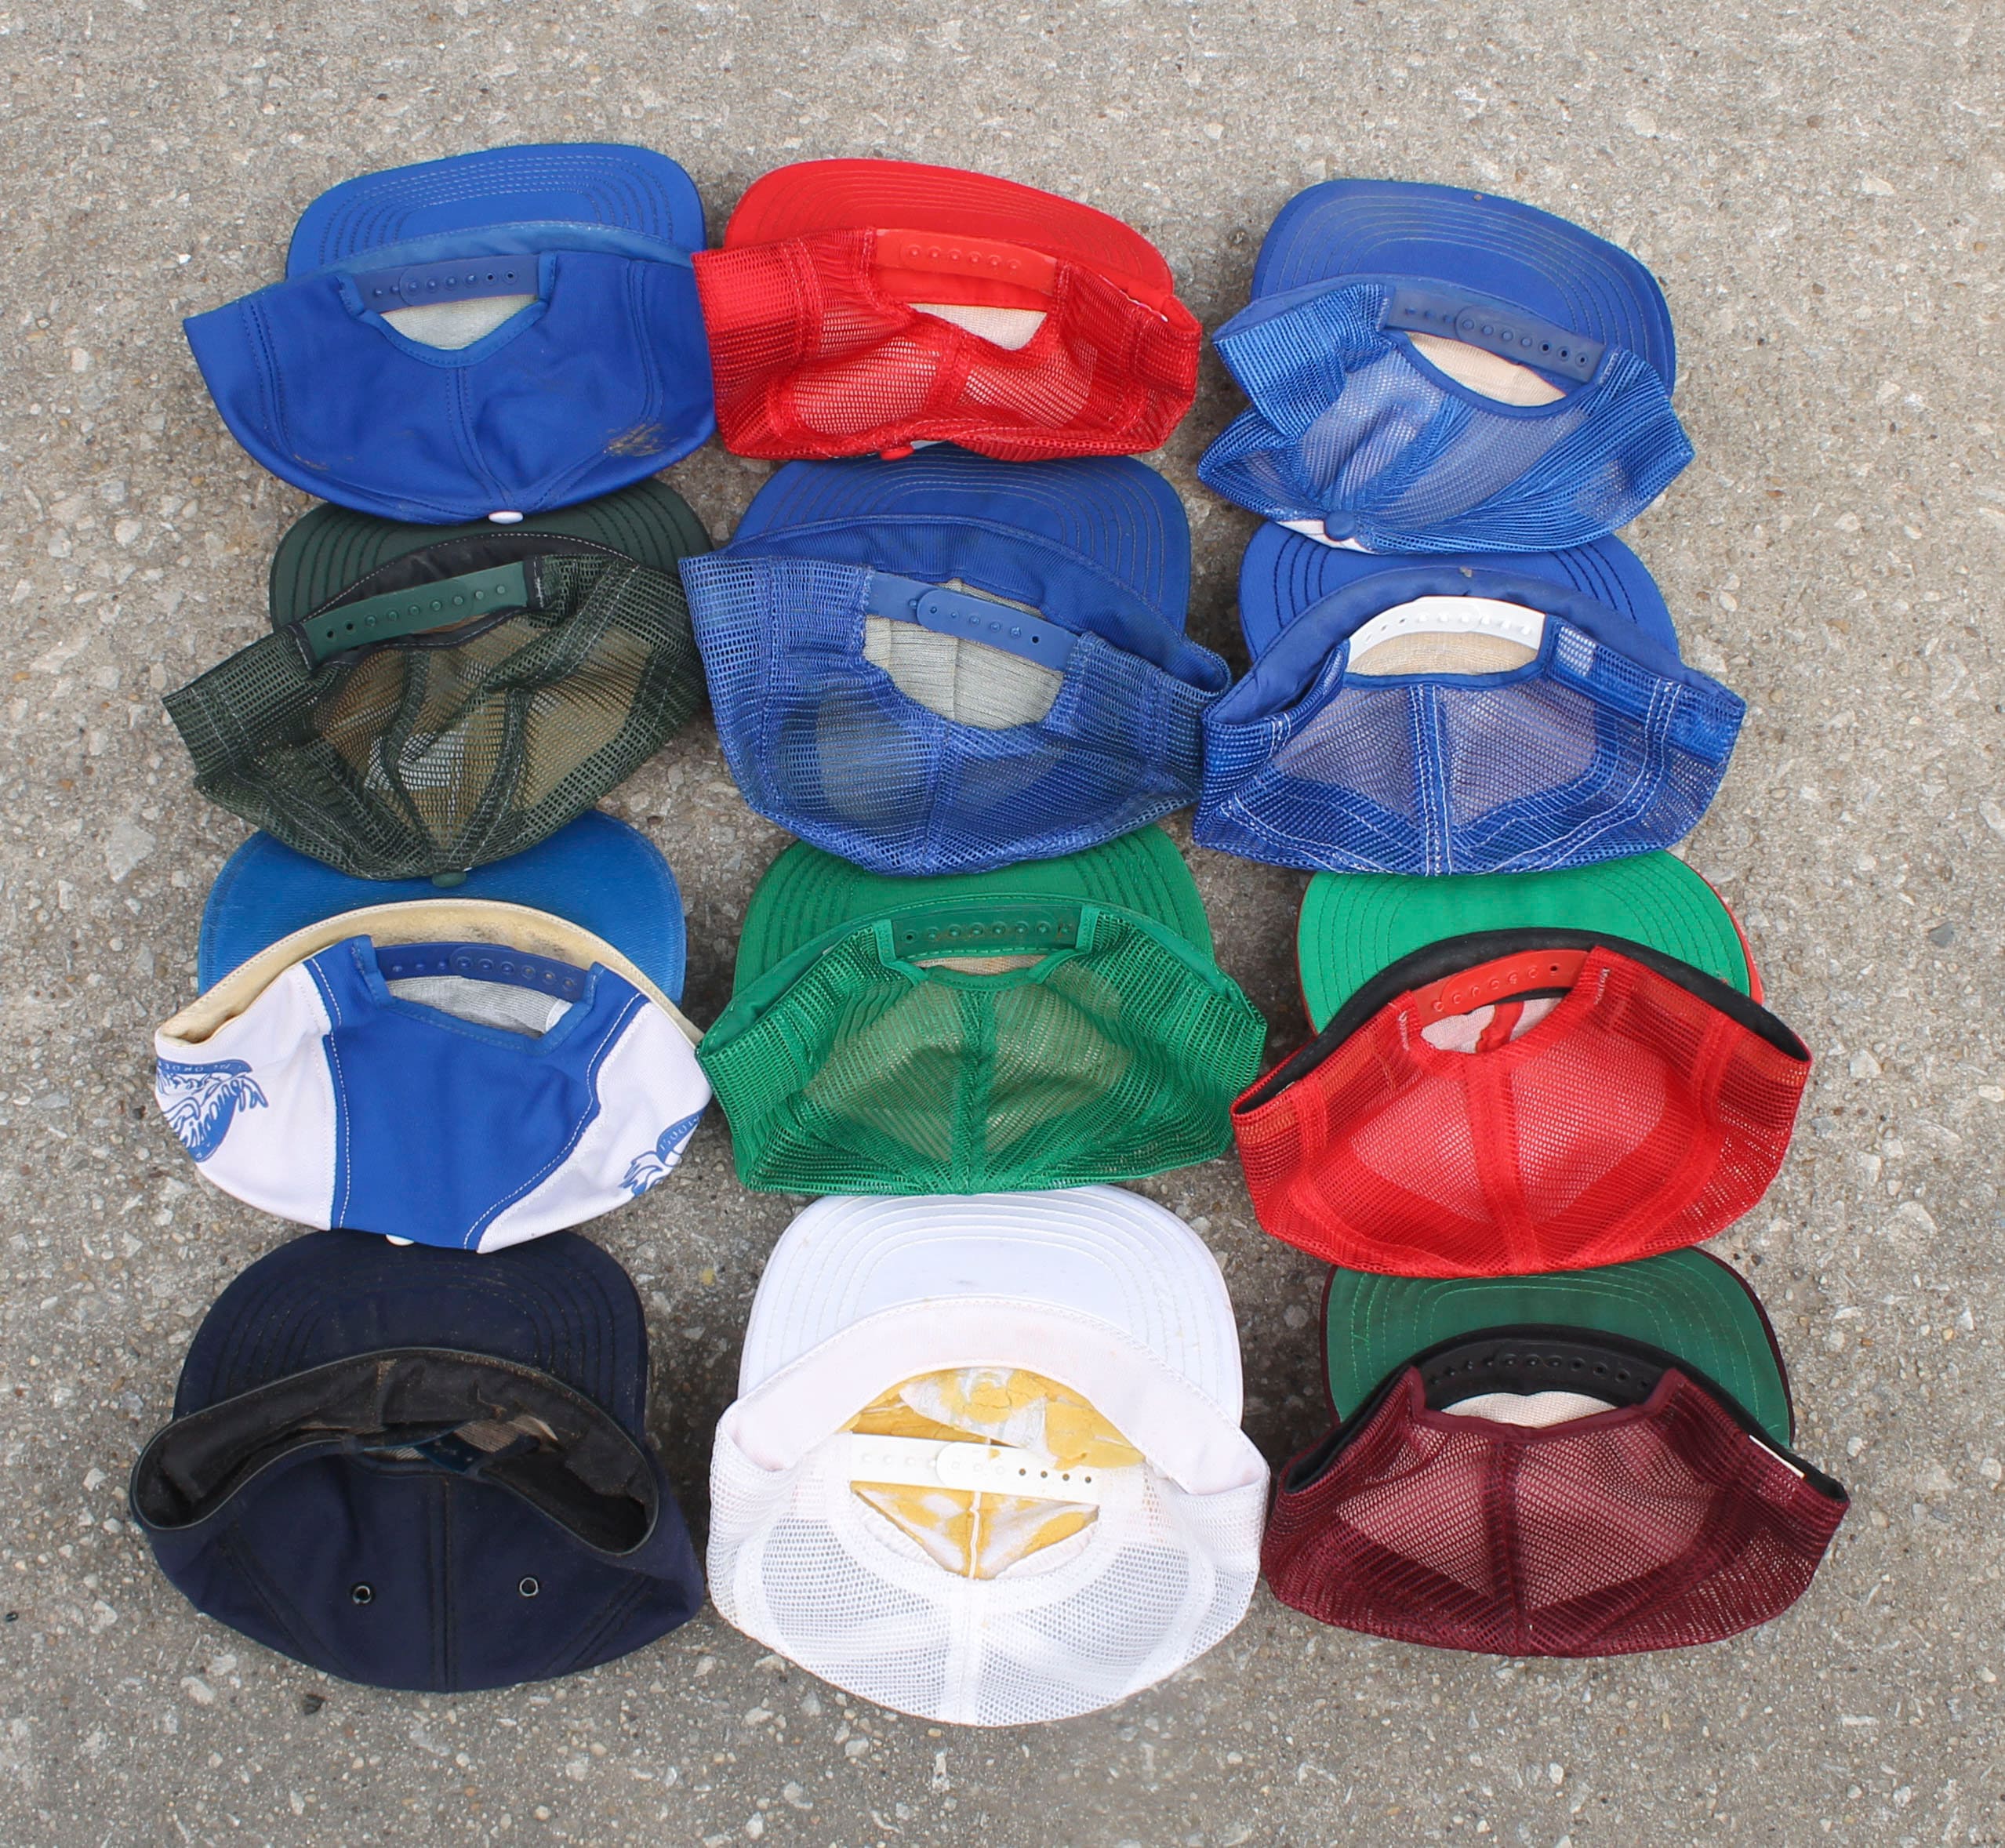 Vintage Made in USA Trucker Hat Variety Pack One Dozen Snapback Baseball  Caps Lot Collection Bulk Wholesale Crumbling Foam, Sold AS-IS 